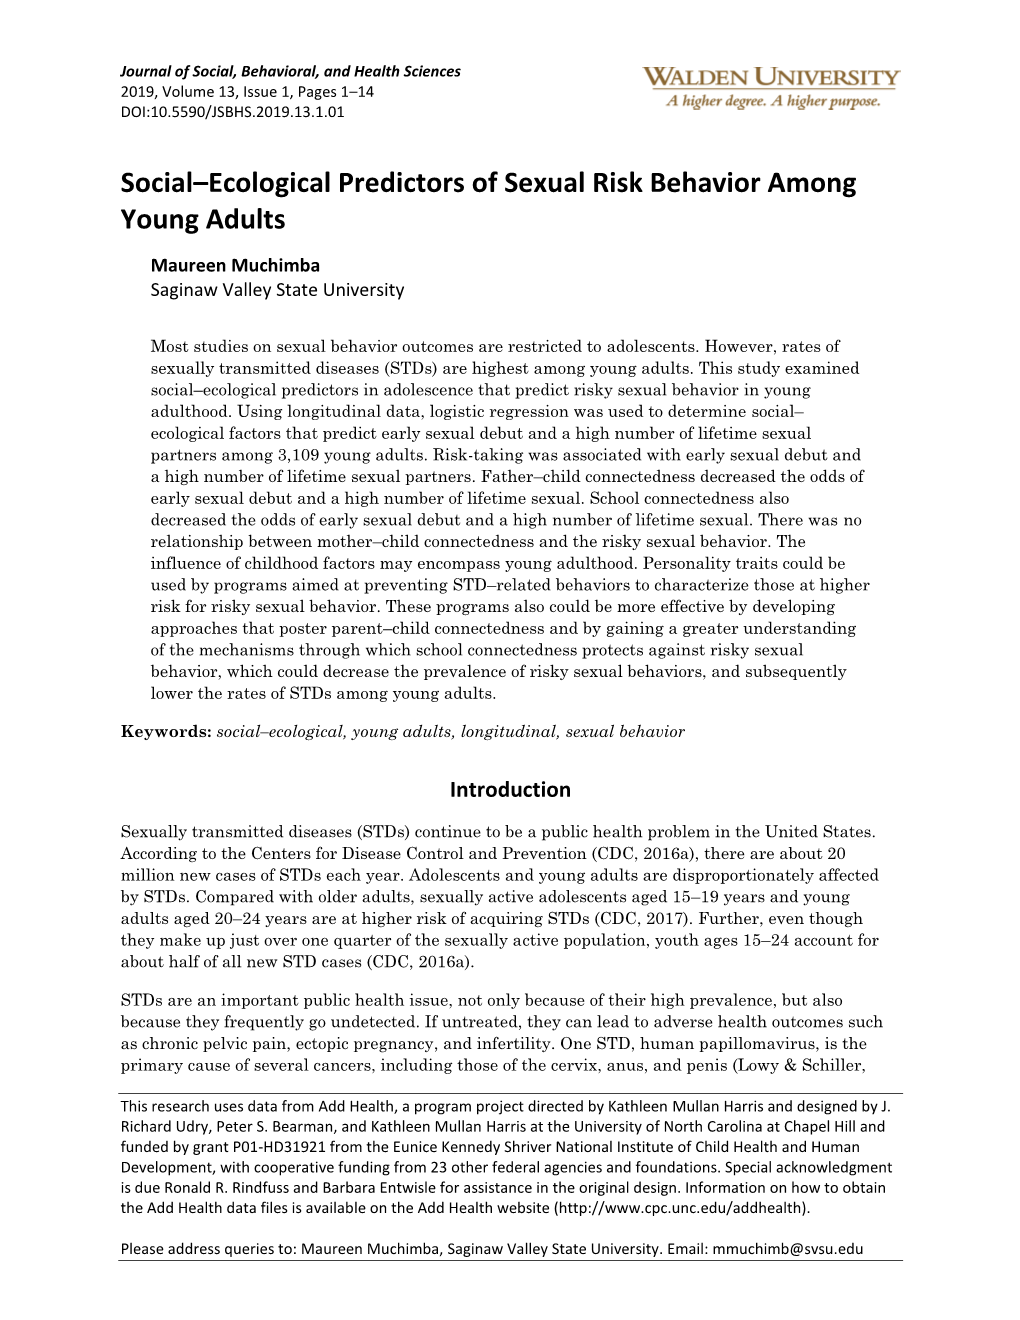 Social Ecological Predictors of Risky Sexual Behavior Among Young